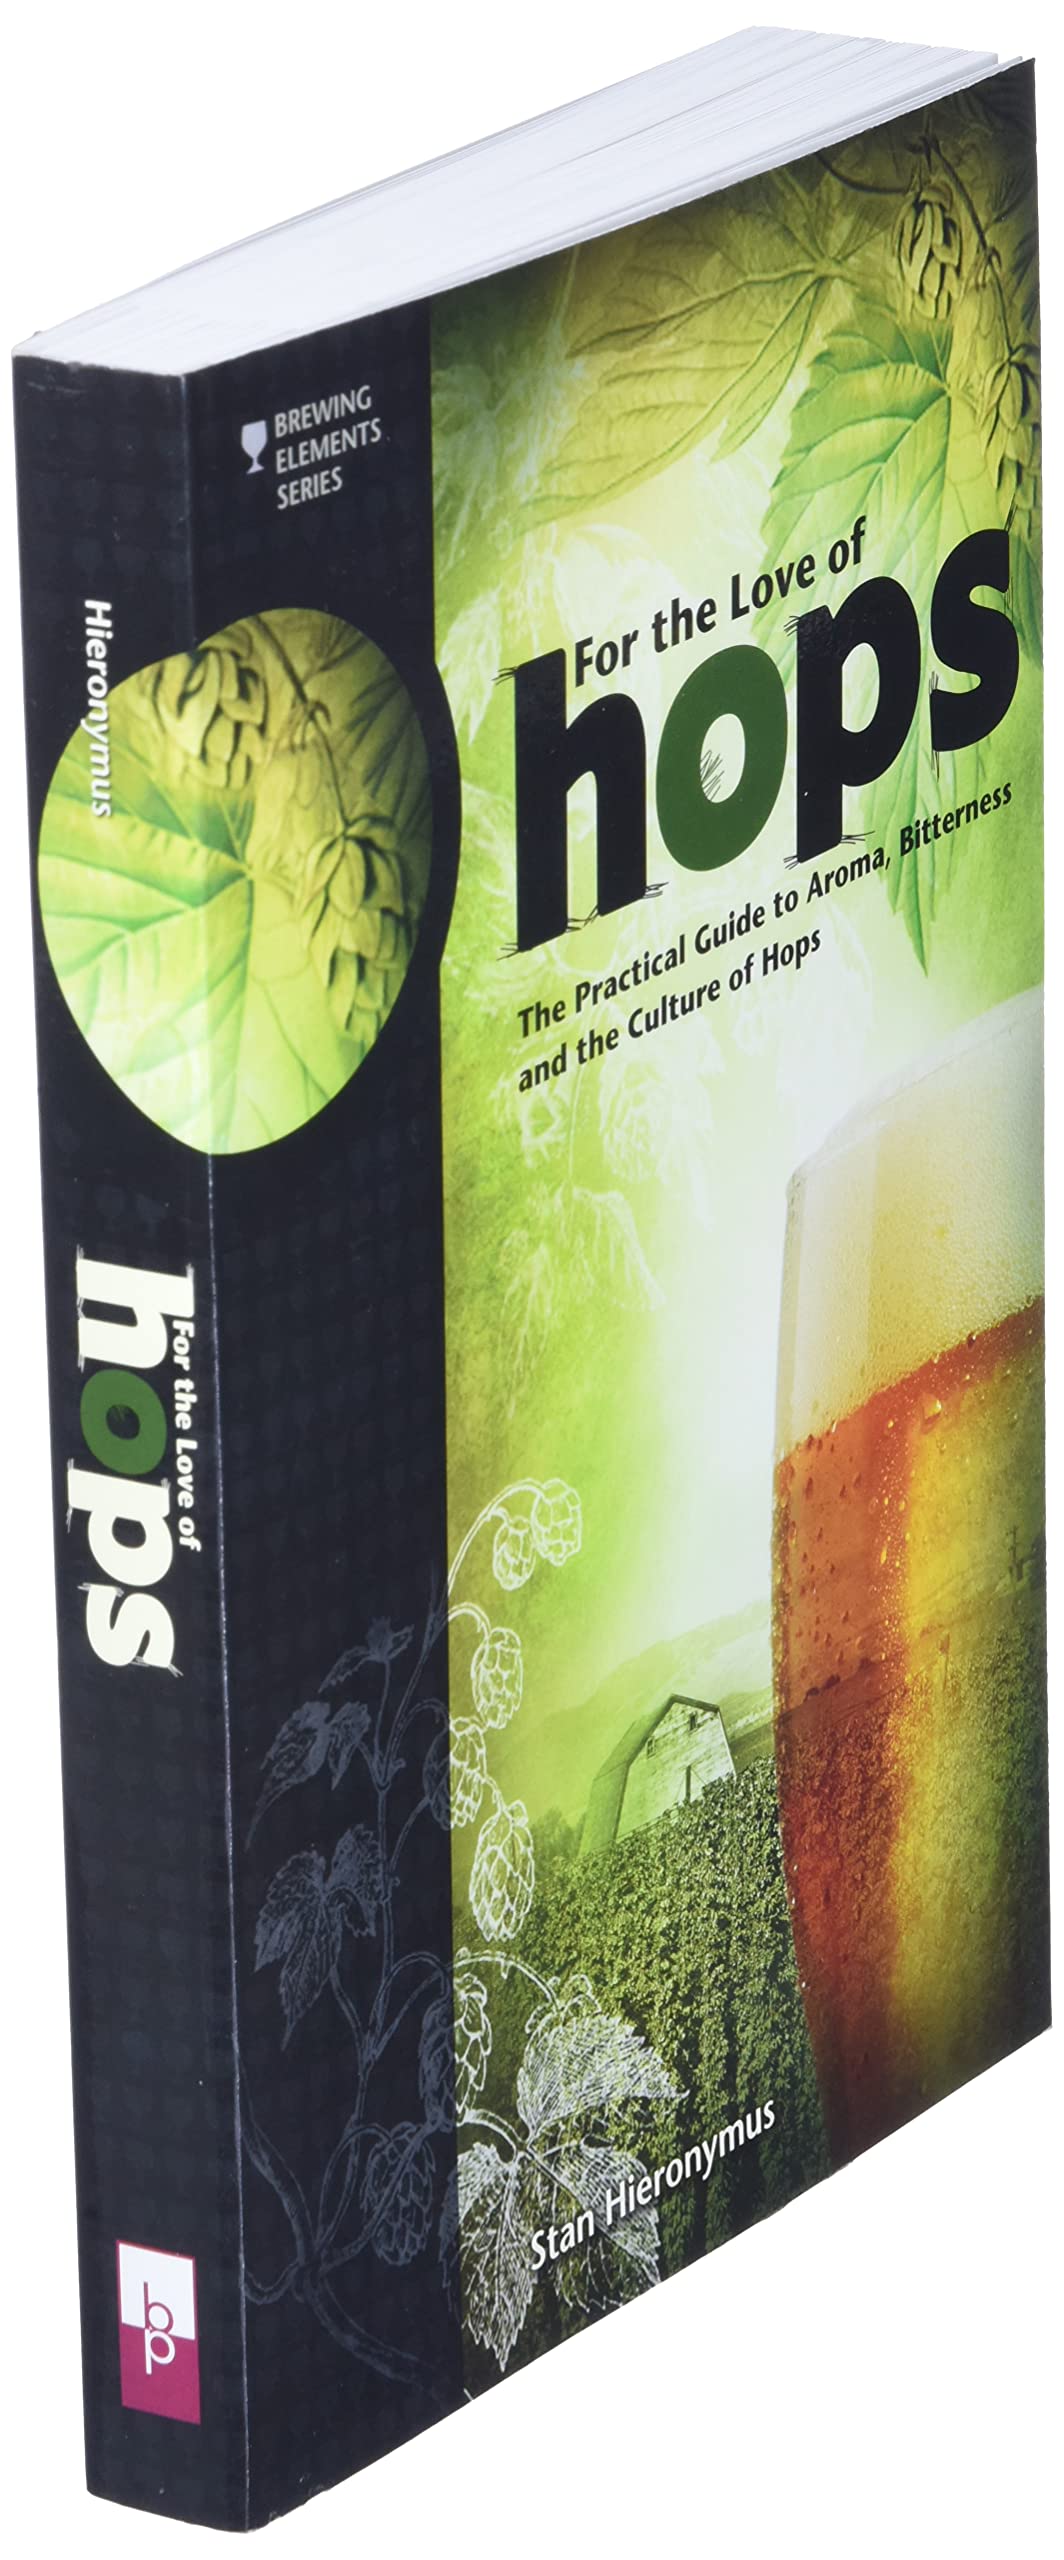 For The Love of Hops: The Practical Guide to Aroma, Bitterness and the Culture of Hops (Brewing Elements)